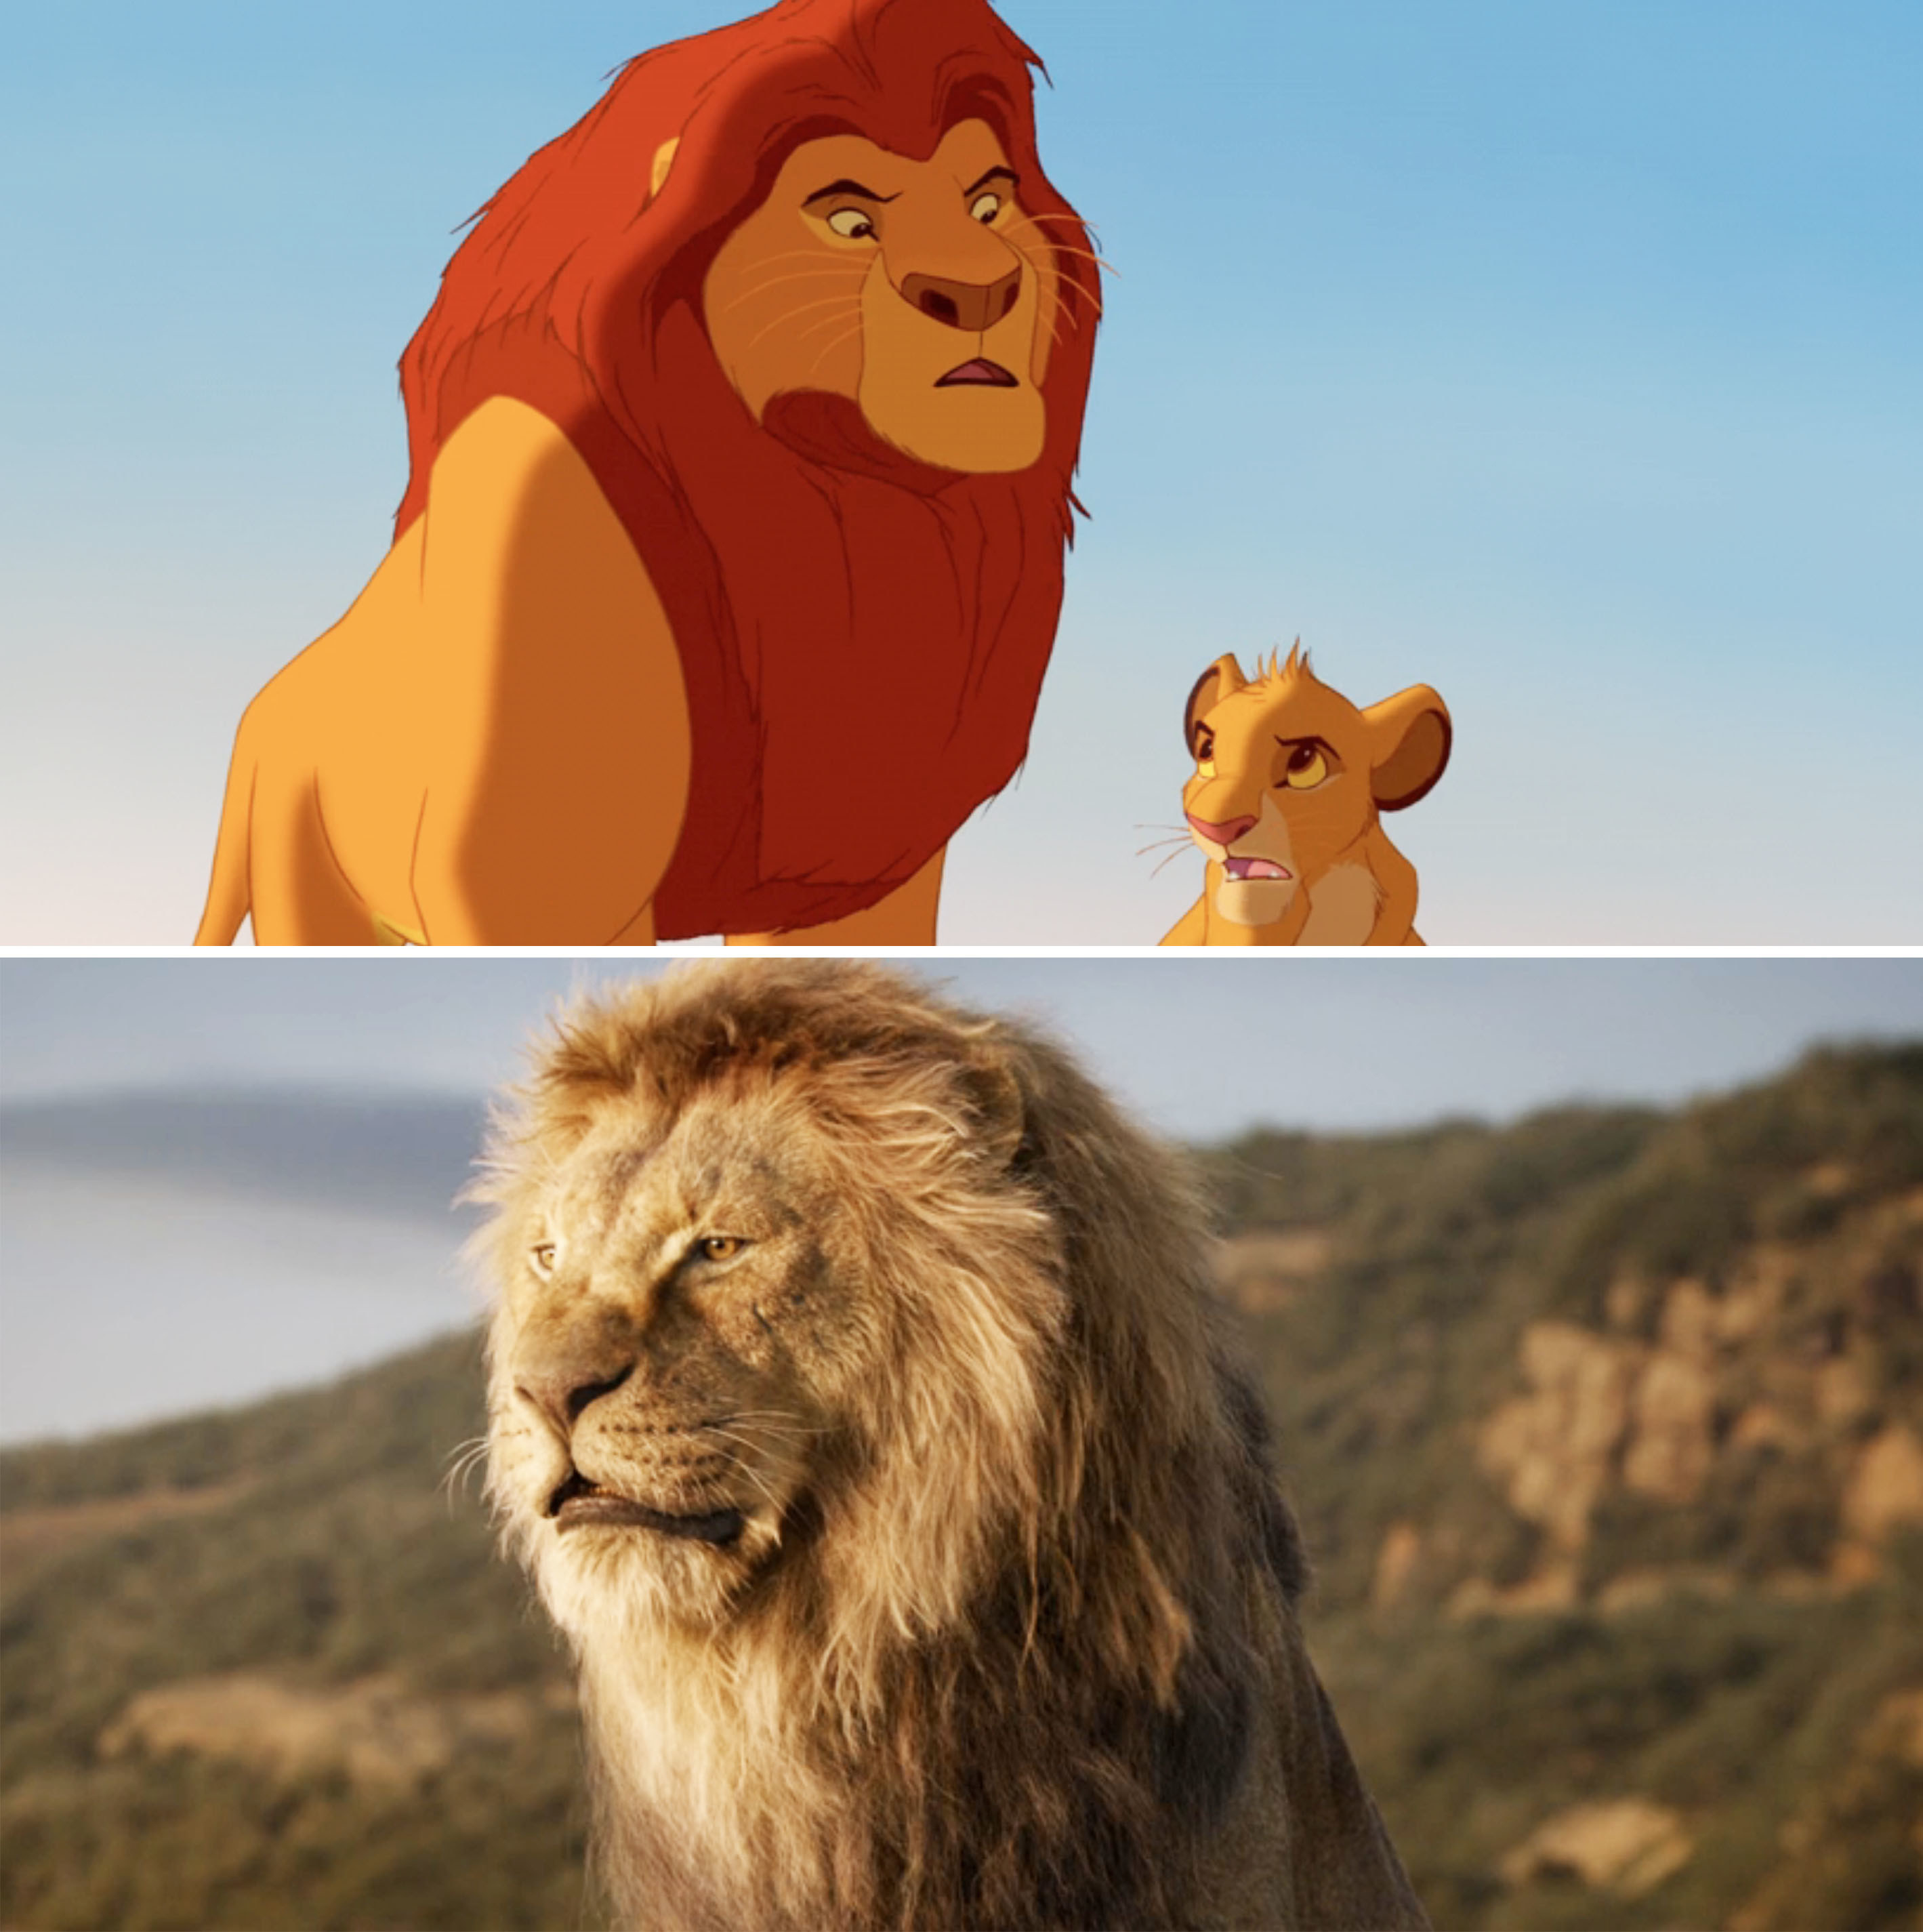 Screen grabs from &quot;The Lion King&quot;